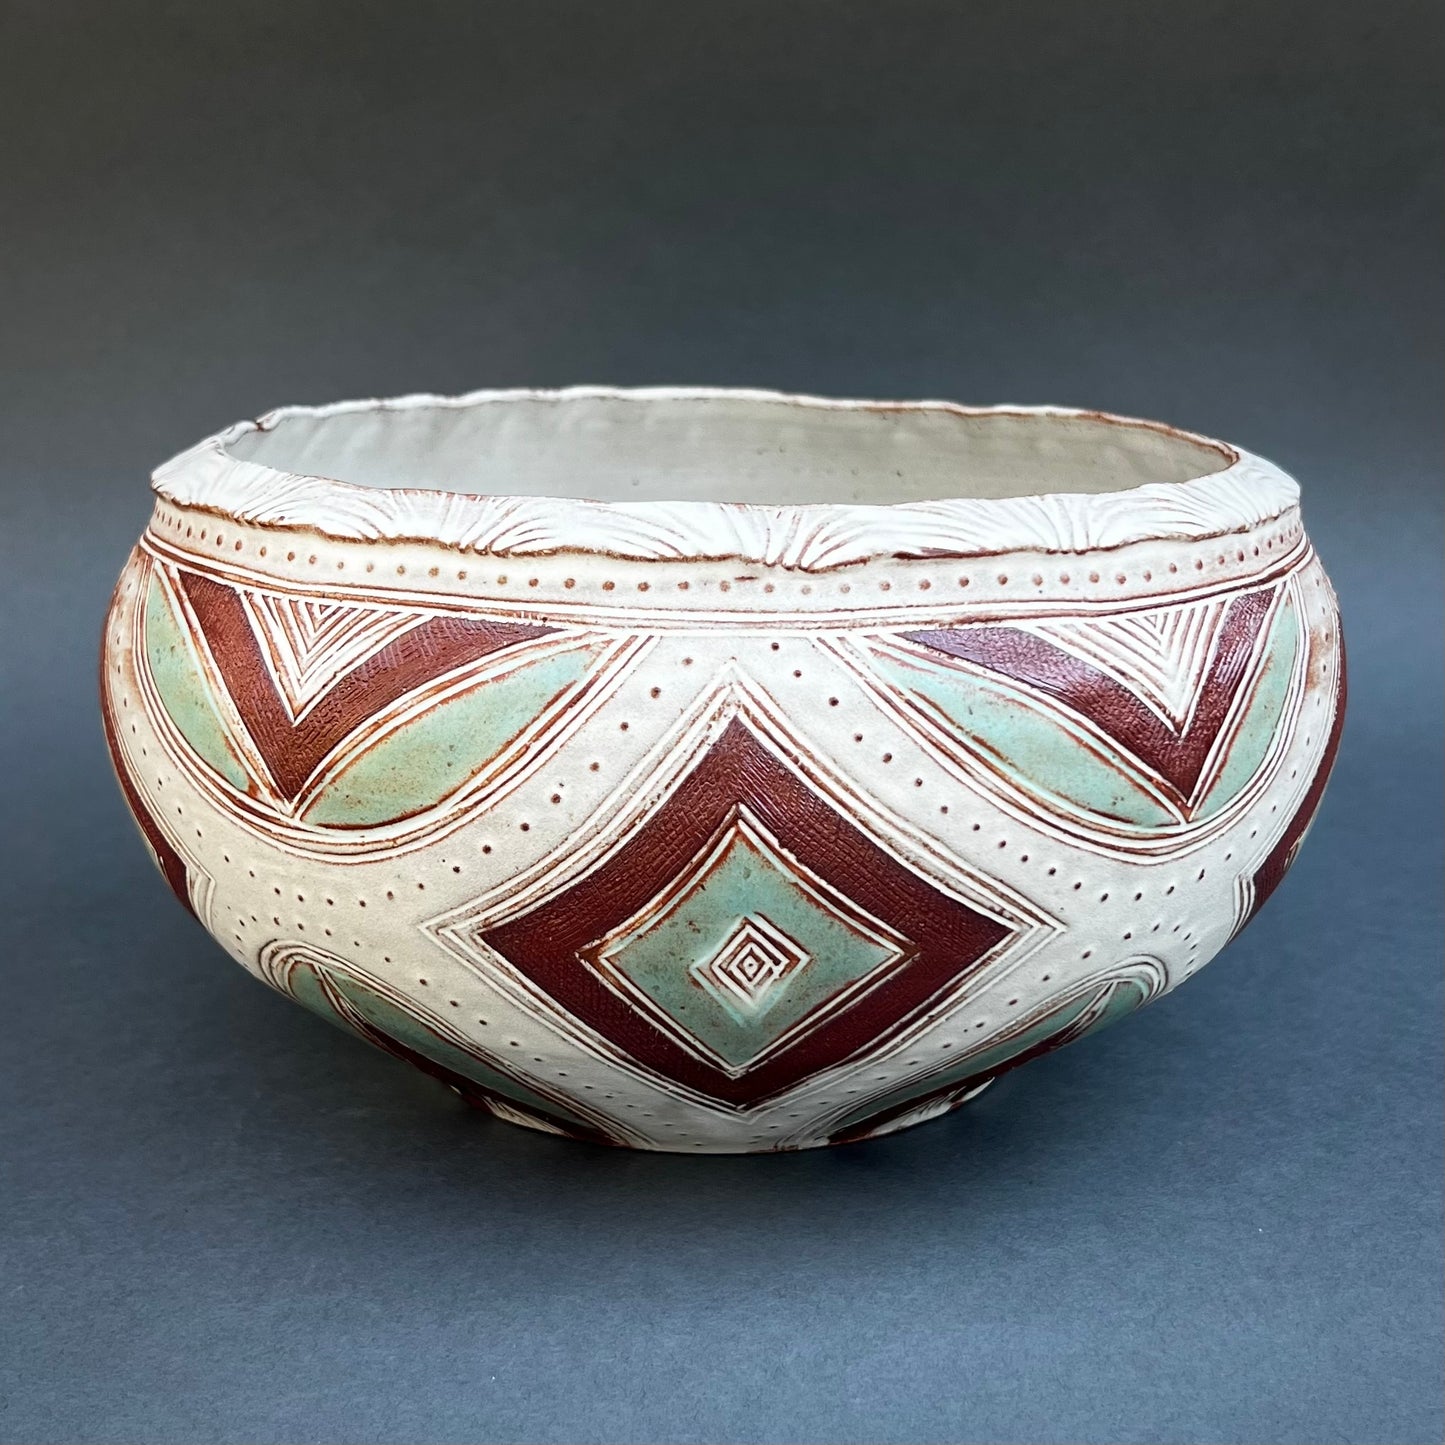 Nupe Serving Bowl